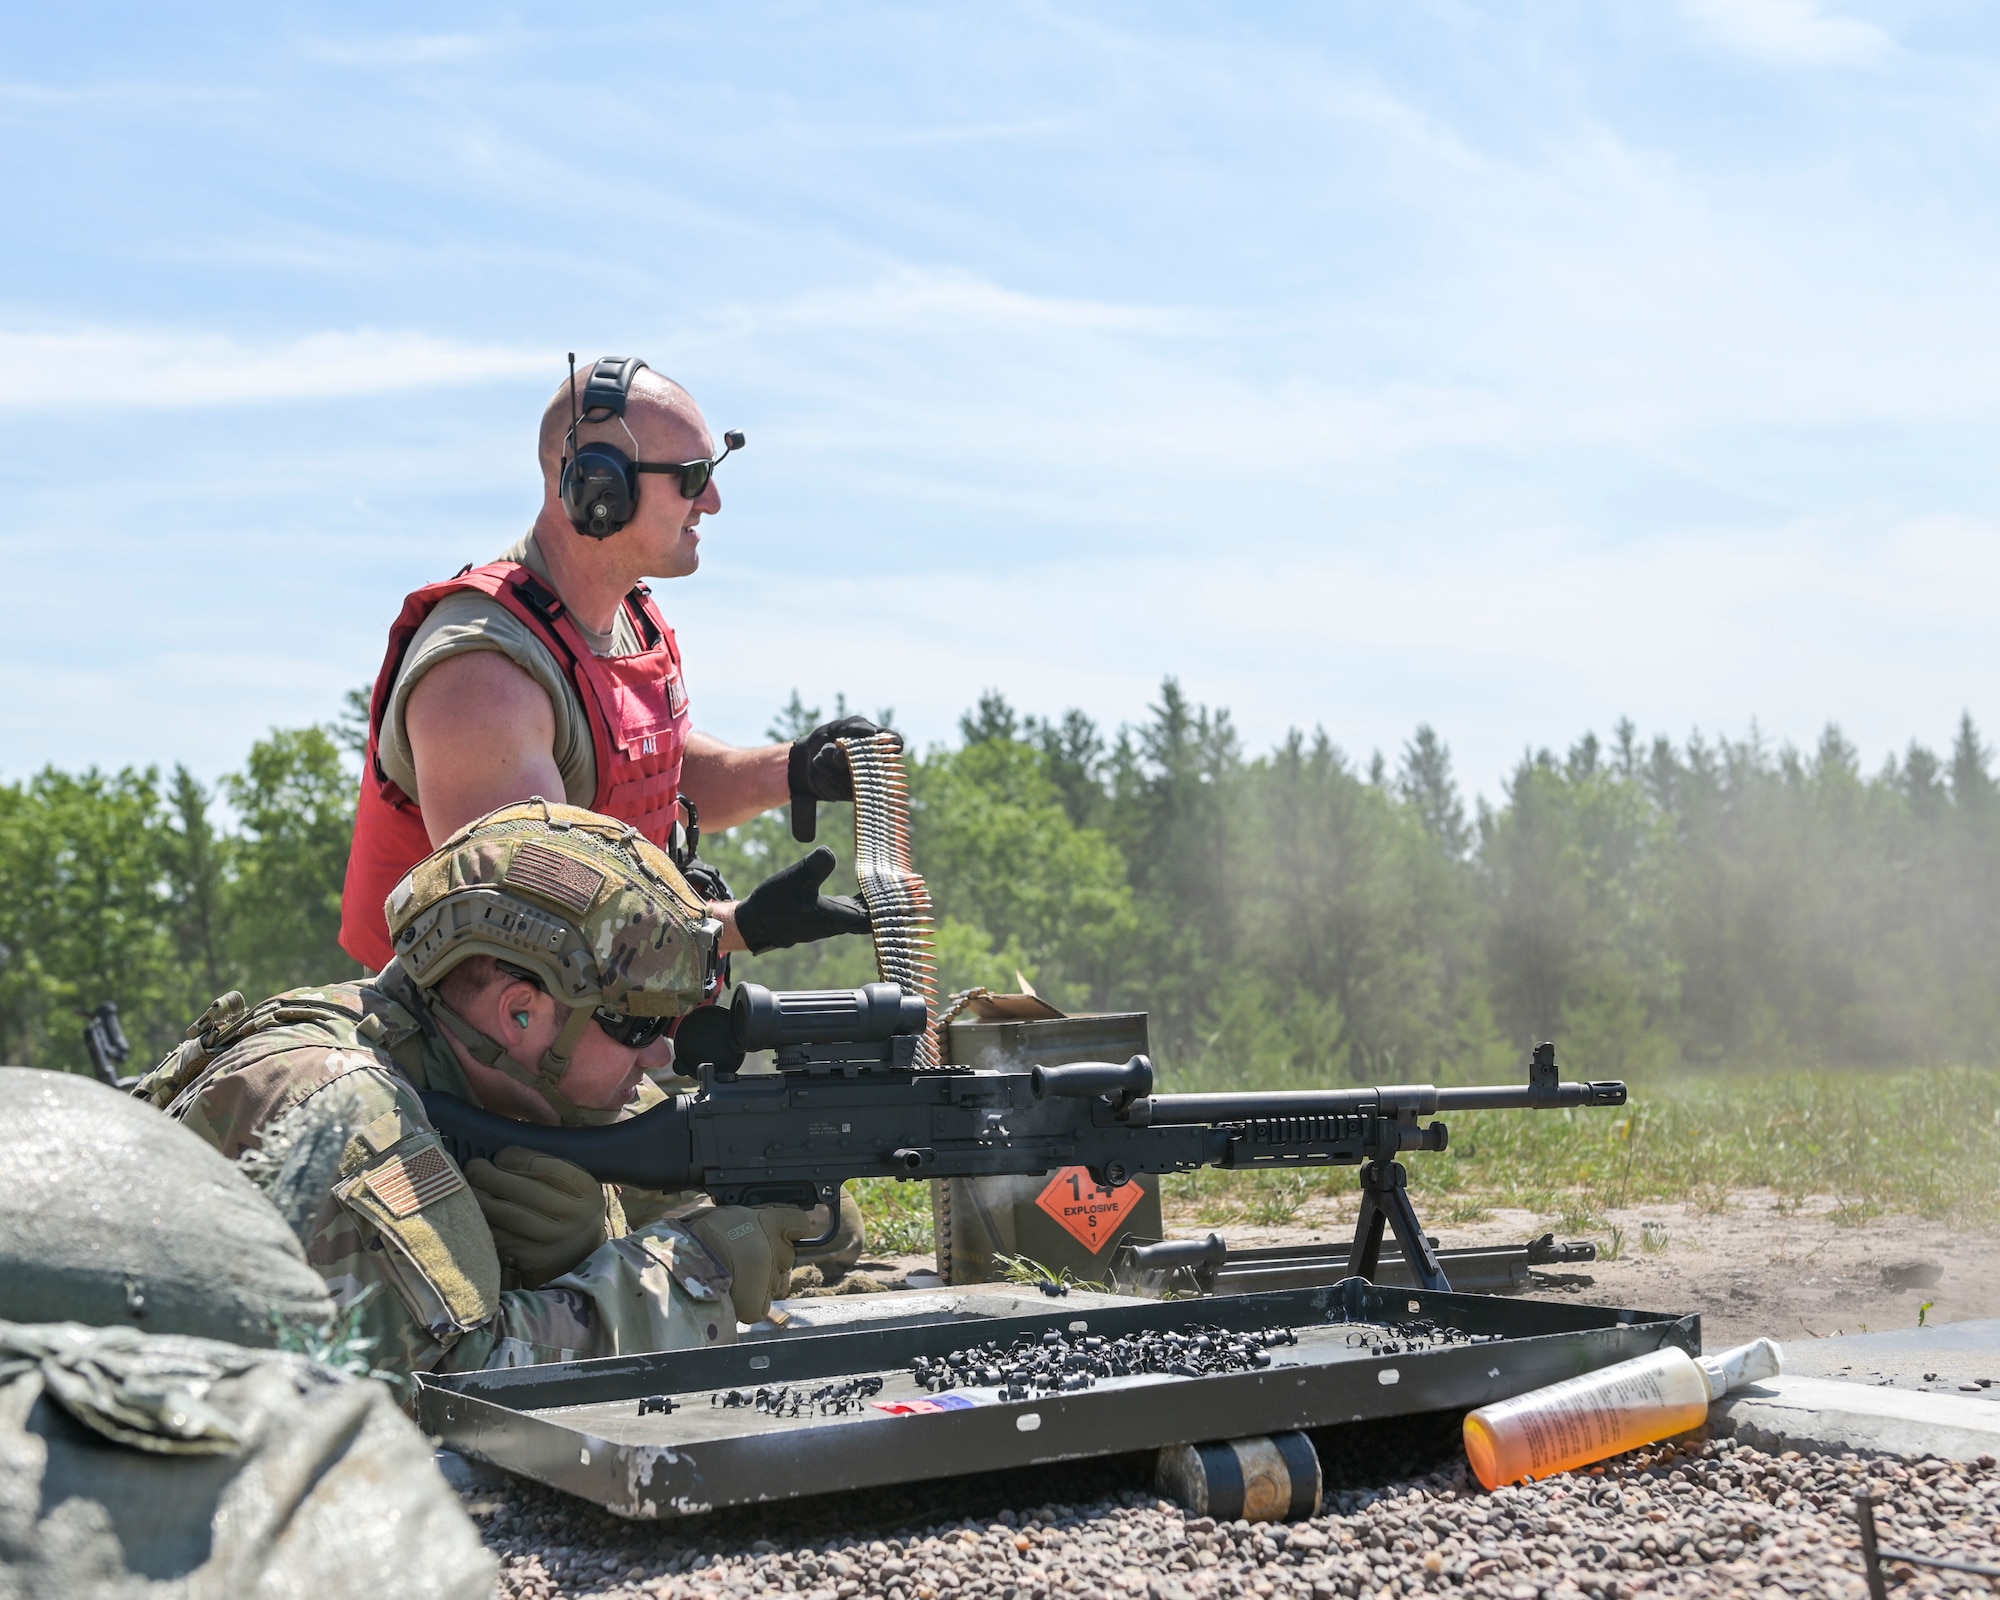 U.S. Air Force Tech. Sgt. James Alt supports U.S. Air Force Tech. Sgt. Chase Kenimer, both security forces Airmen assigned to the 115th Security Forces Squadron, Truax Field, Madison, Wisconsin, while shooting an M240B Machine Gun during Audacious Warrior July 25, 2021 at Fort McCoy, Wisconsin. Whether down range or at home, Security Forces and Explosive Ordnance Disposal teams work closely together making this joint training beneficial for the overall mission. (U.S. Air National Guard photo by Staff Sgt. Cameron Lewis)